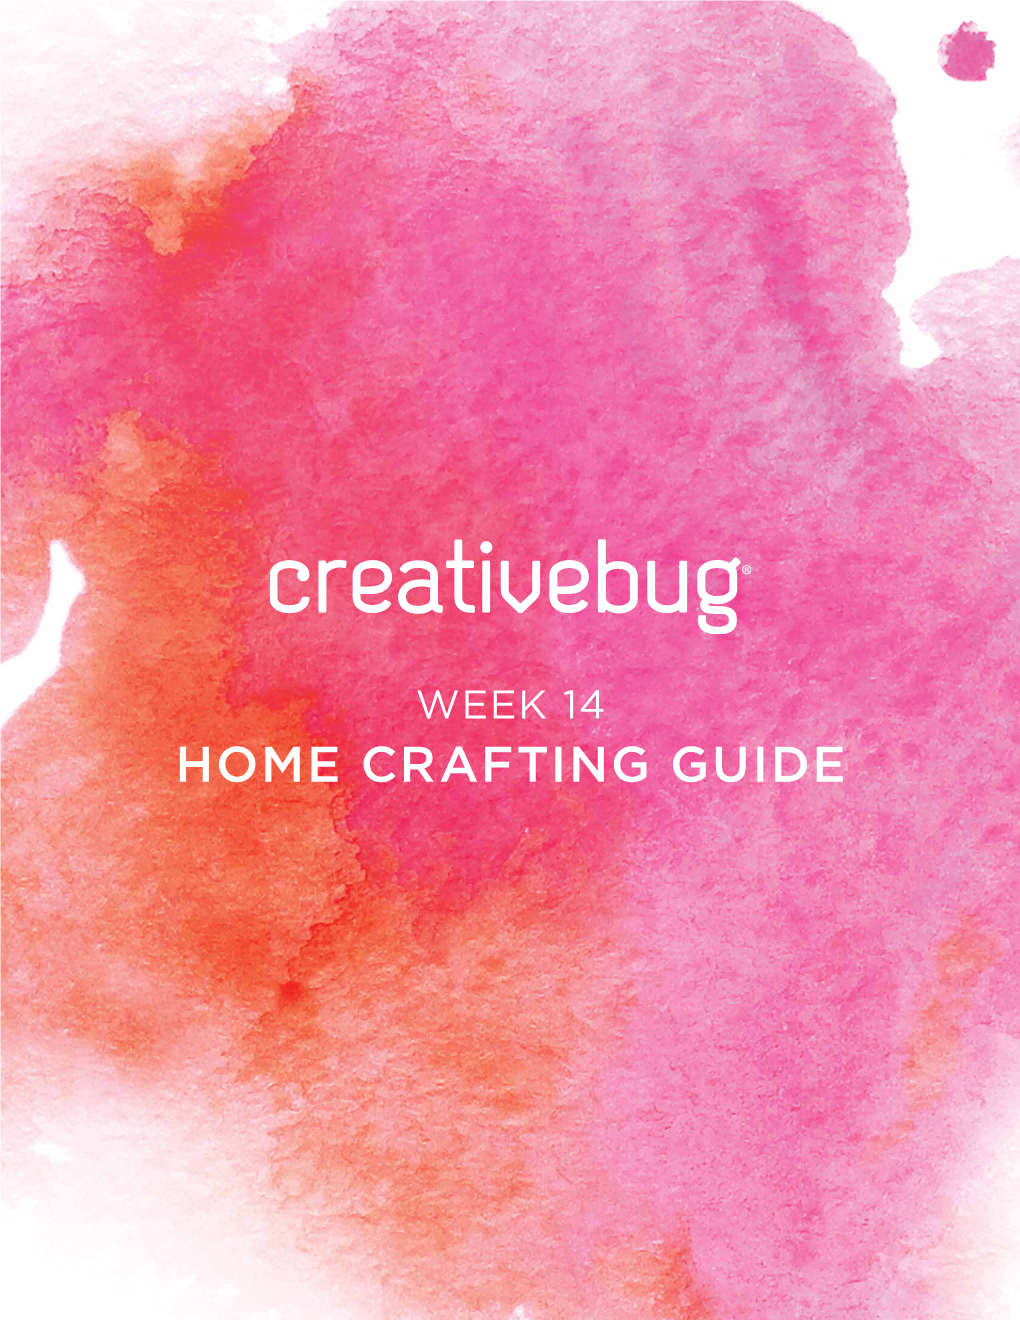 HOME CRAFTING GUIDE We’Re Still Here for You